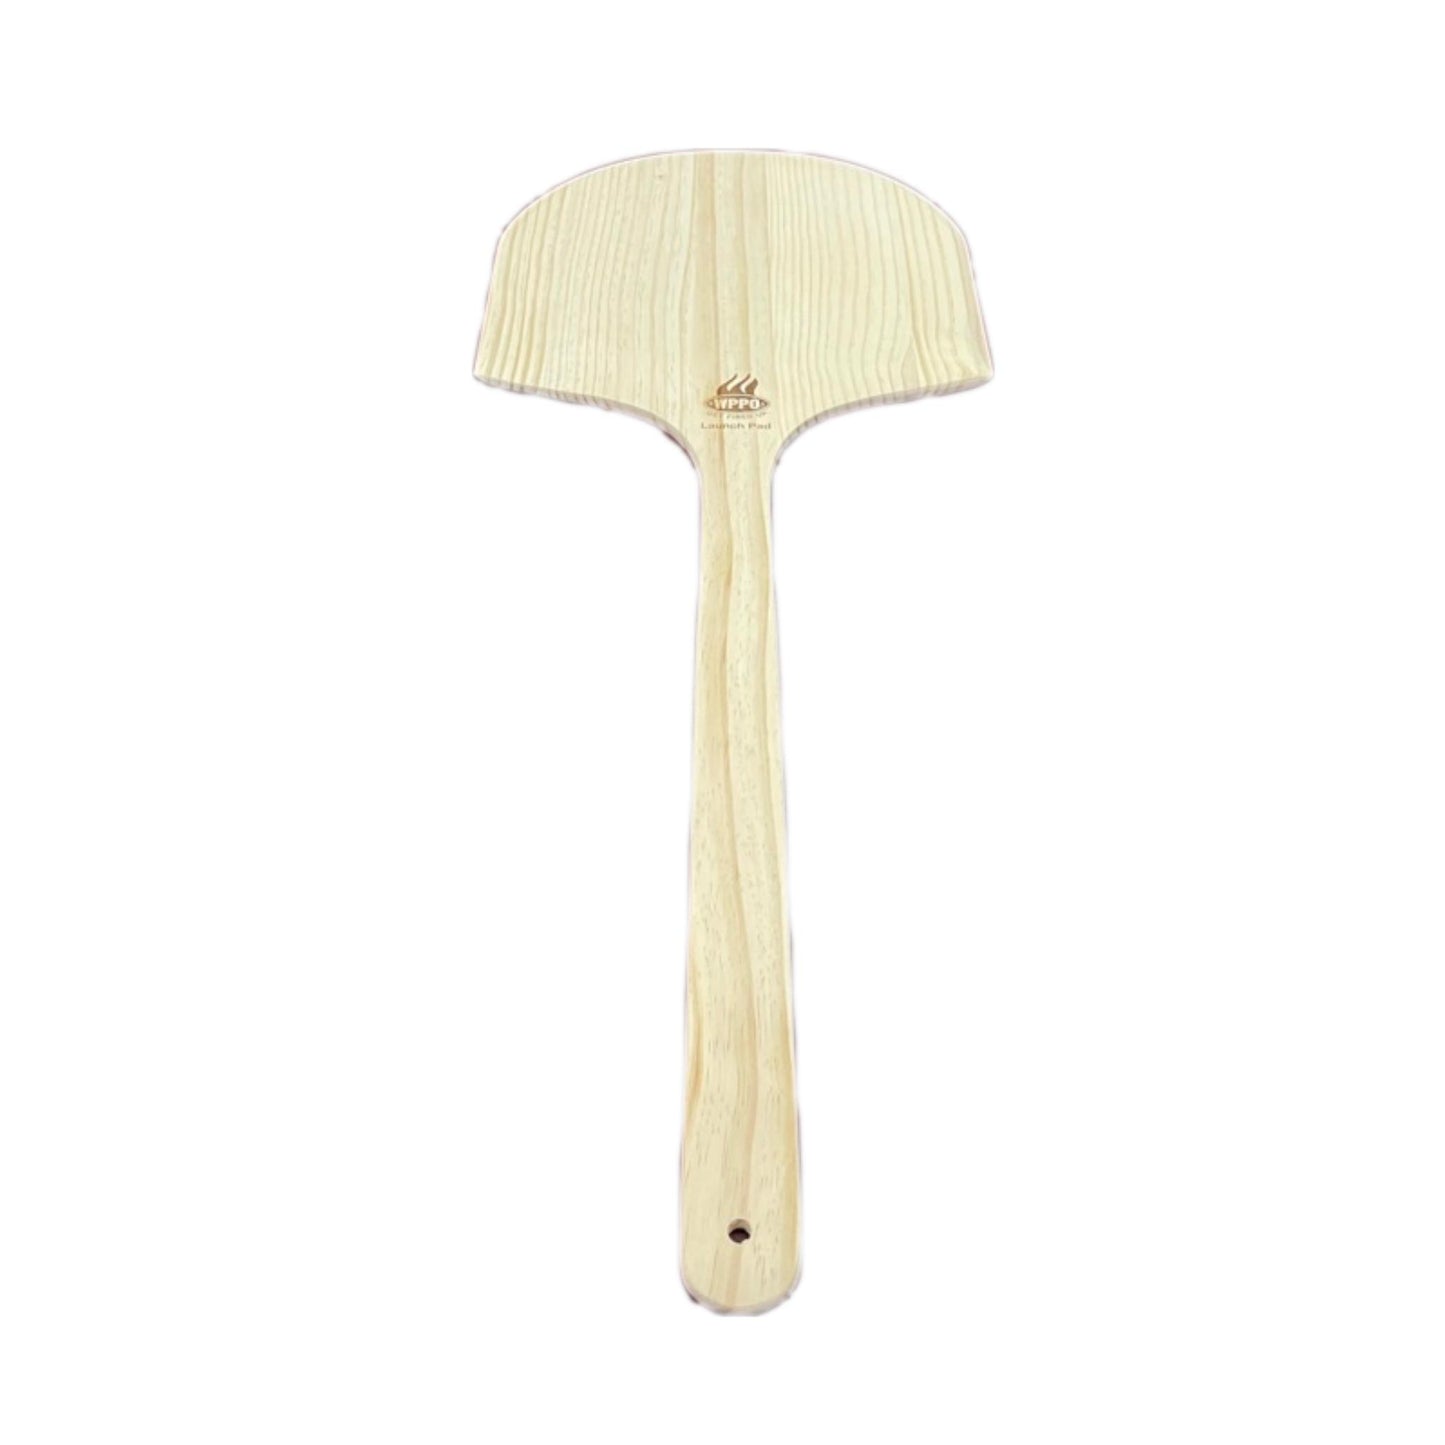 Choice 14 x 16 Wooden Tapered Pizza Peel with 26 Handle